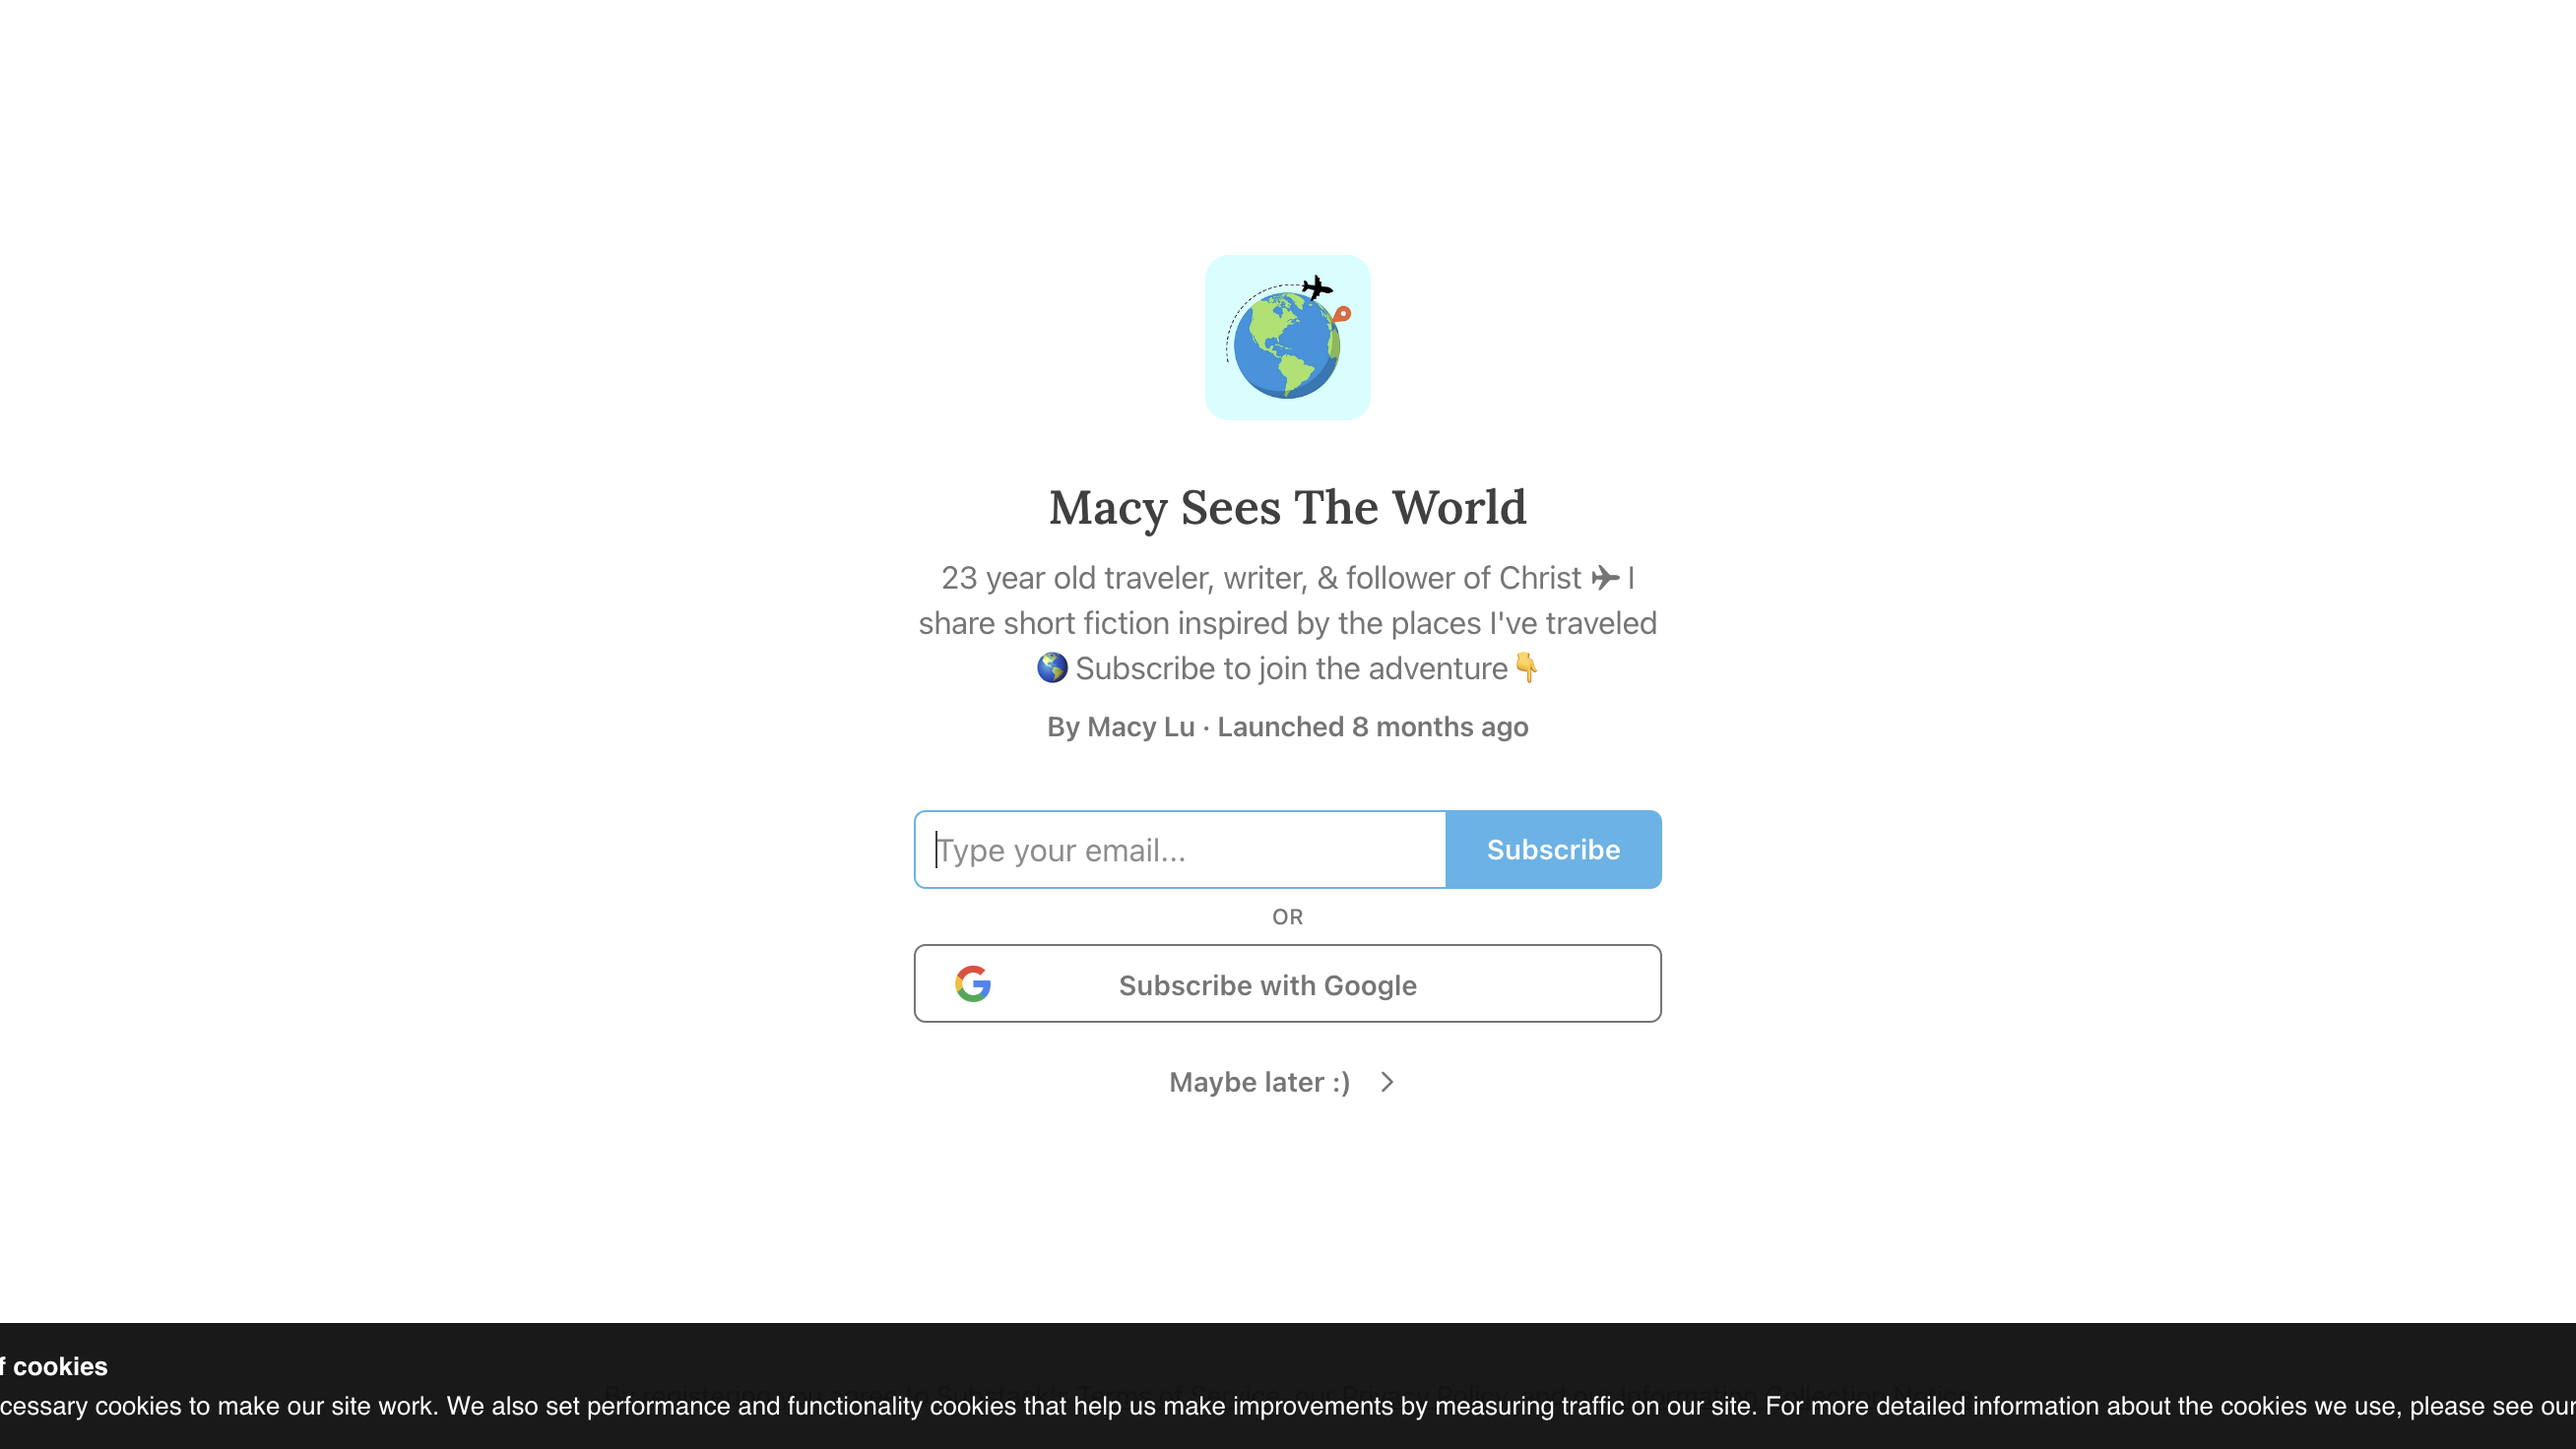 Macy Sees The World homepage